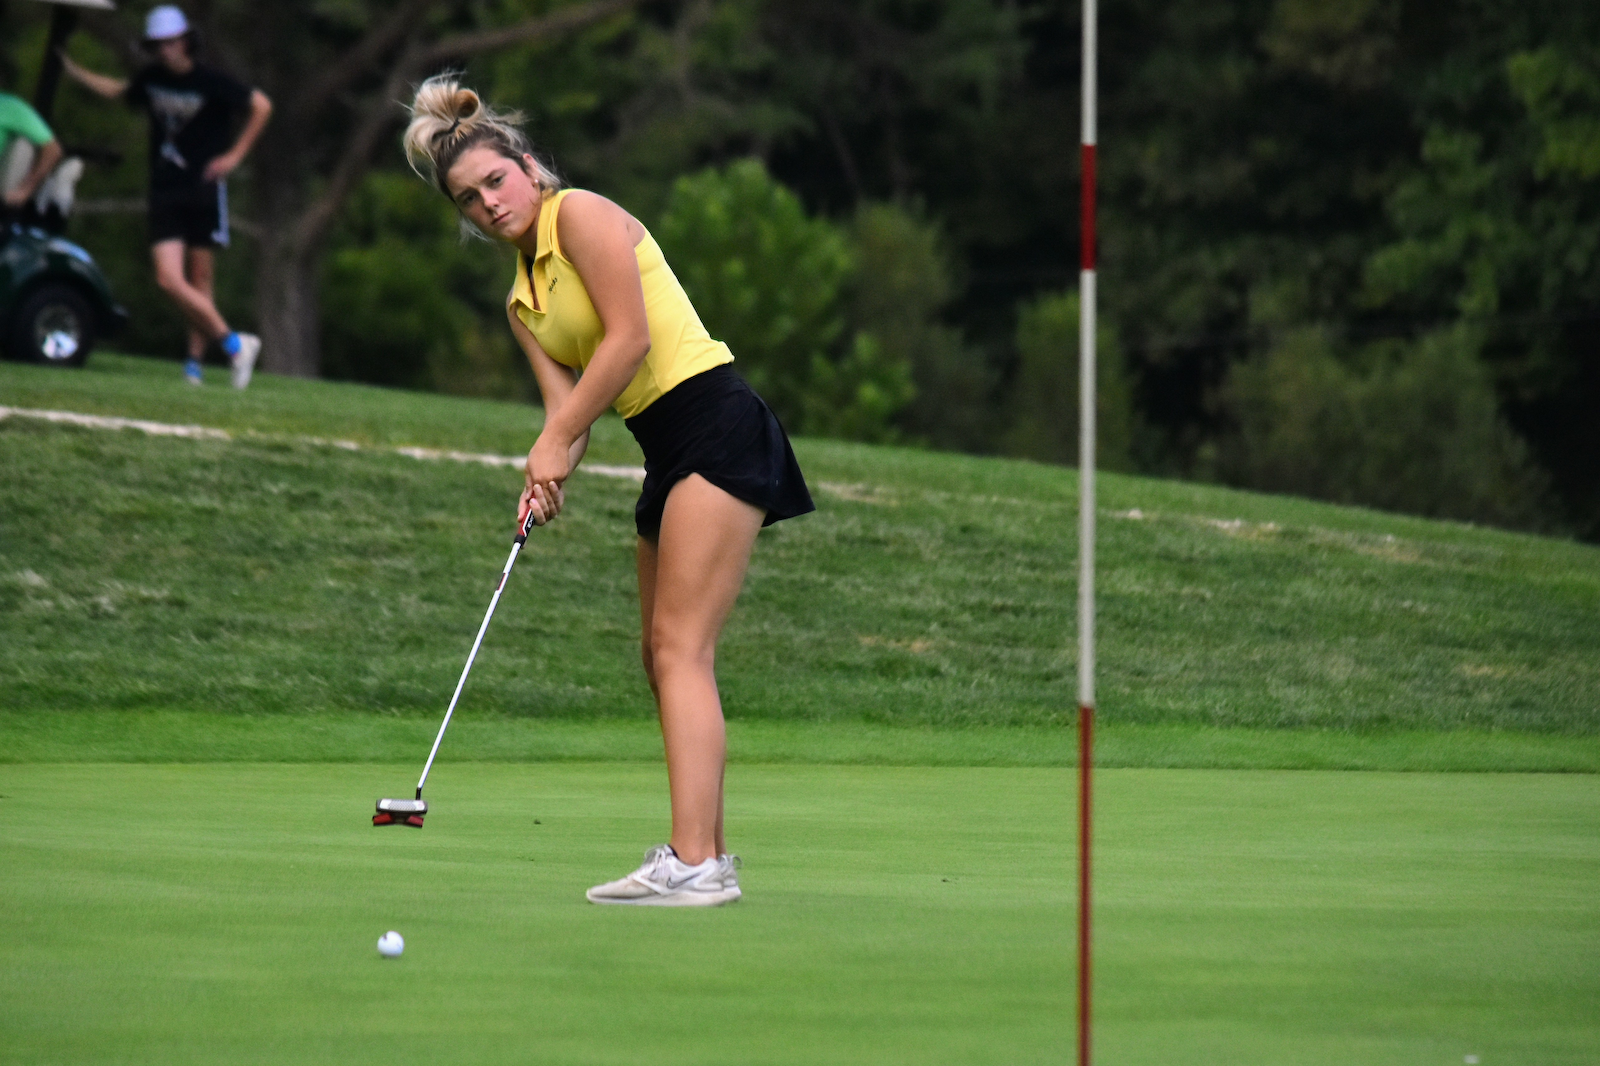 Springs Valley girls' golf celebrates senior Macy Hall with win over Crawford County, Orleans, Paoli cover photo